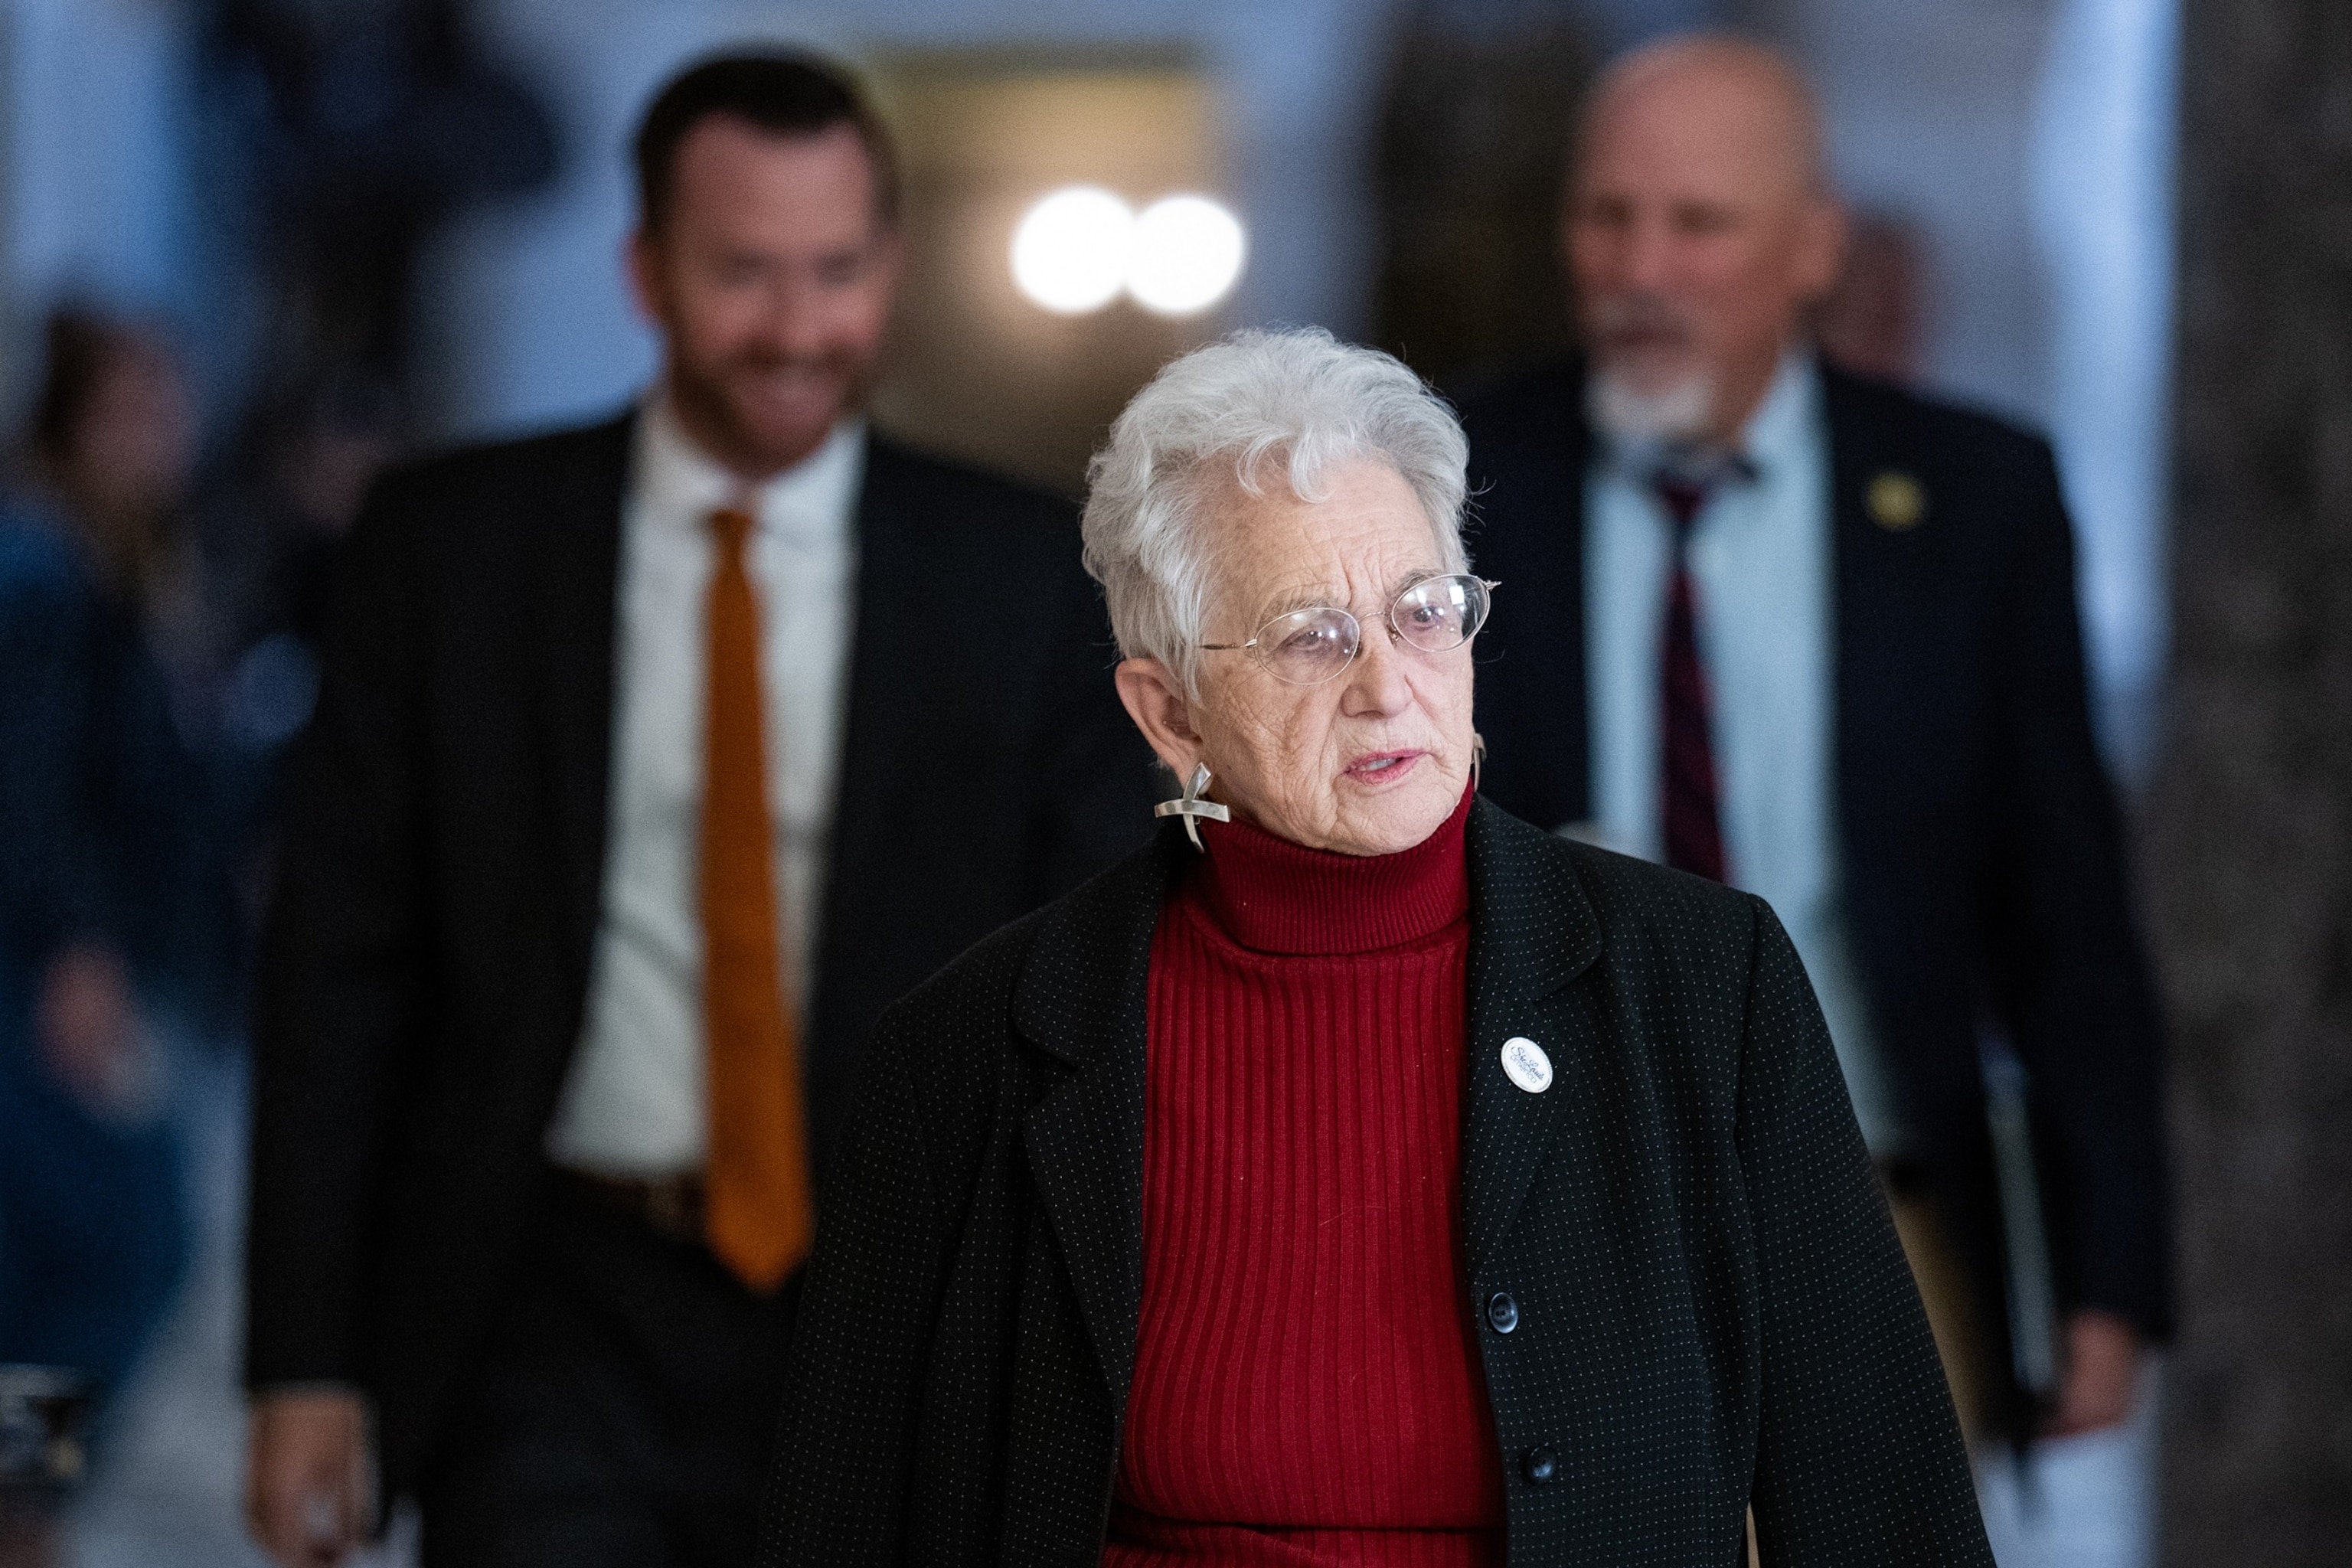 PHOTO: In this Sept. 29, 2023, file photo, Rep. Virginia Foxx walks to the House floor for a vote in the Capitol in Washington, D.C.